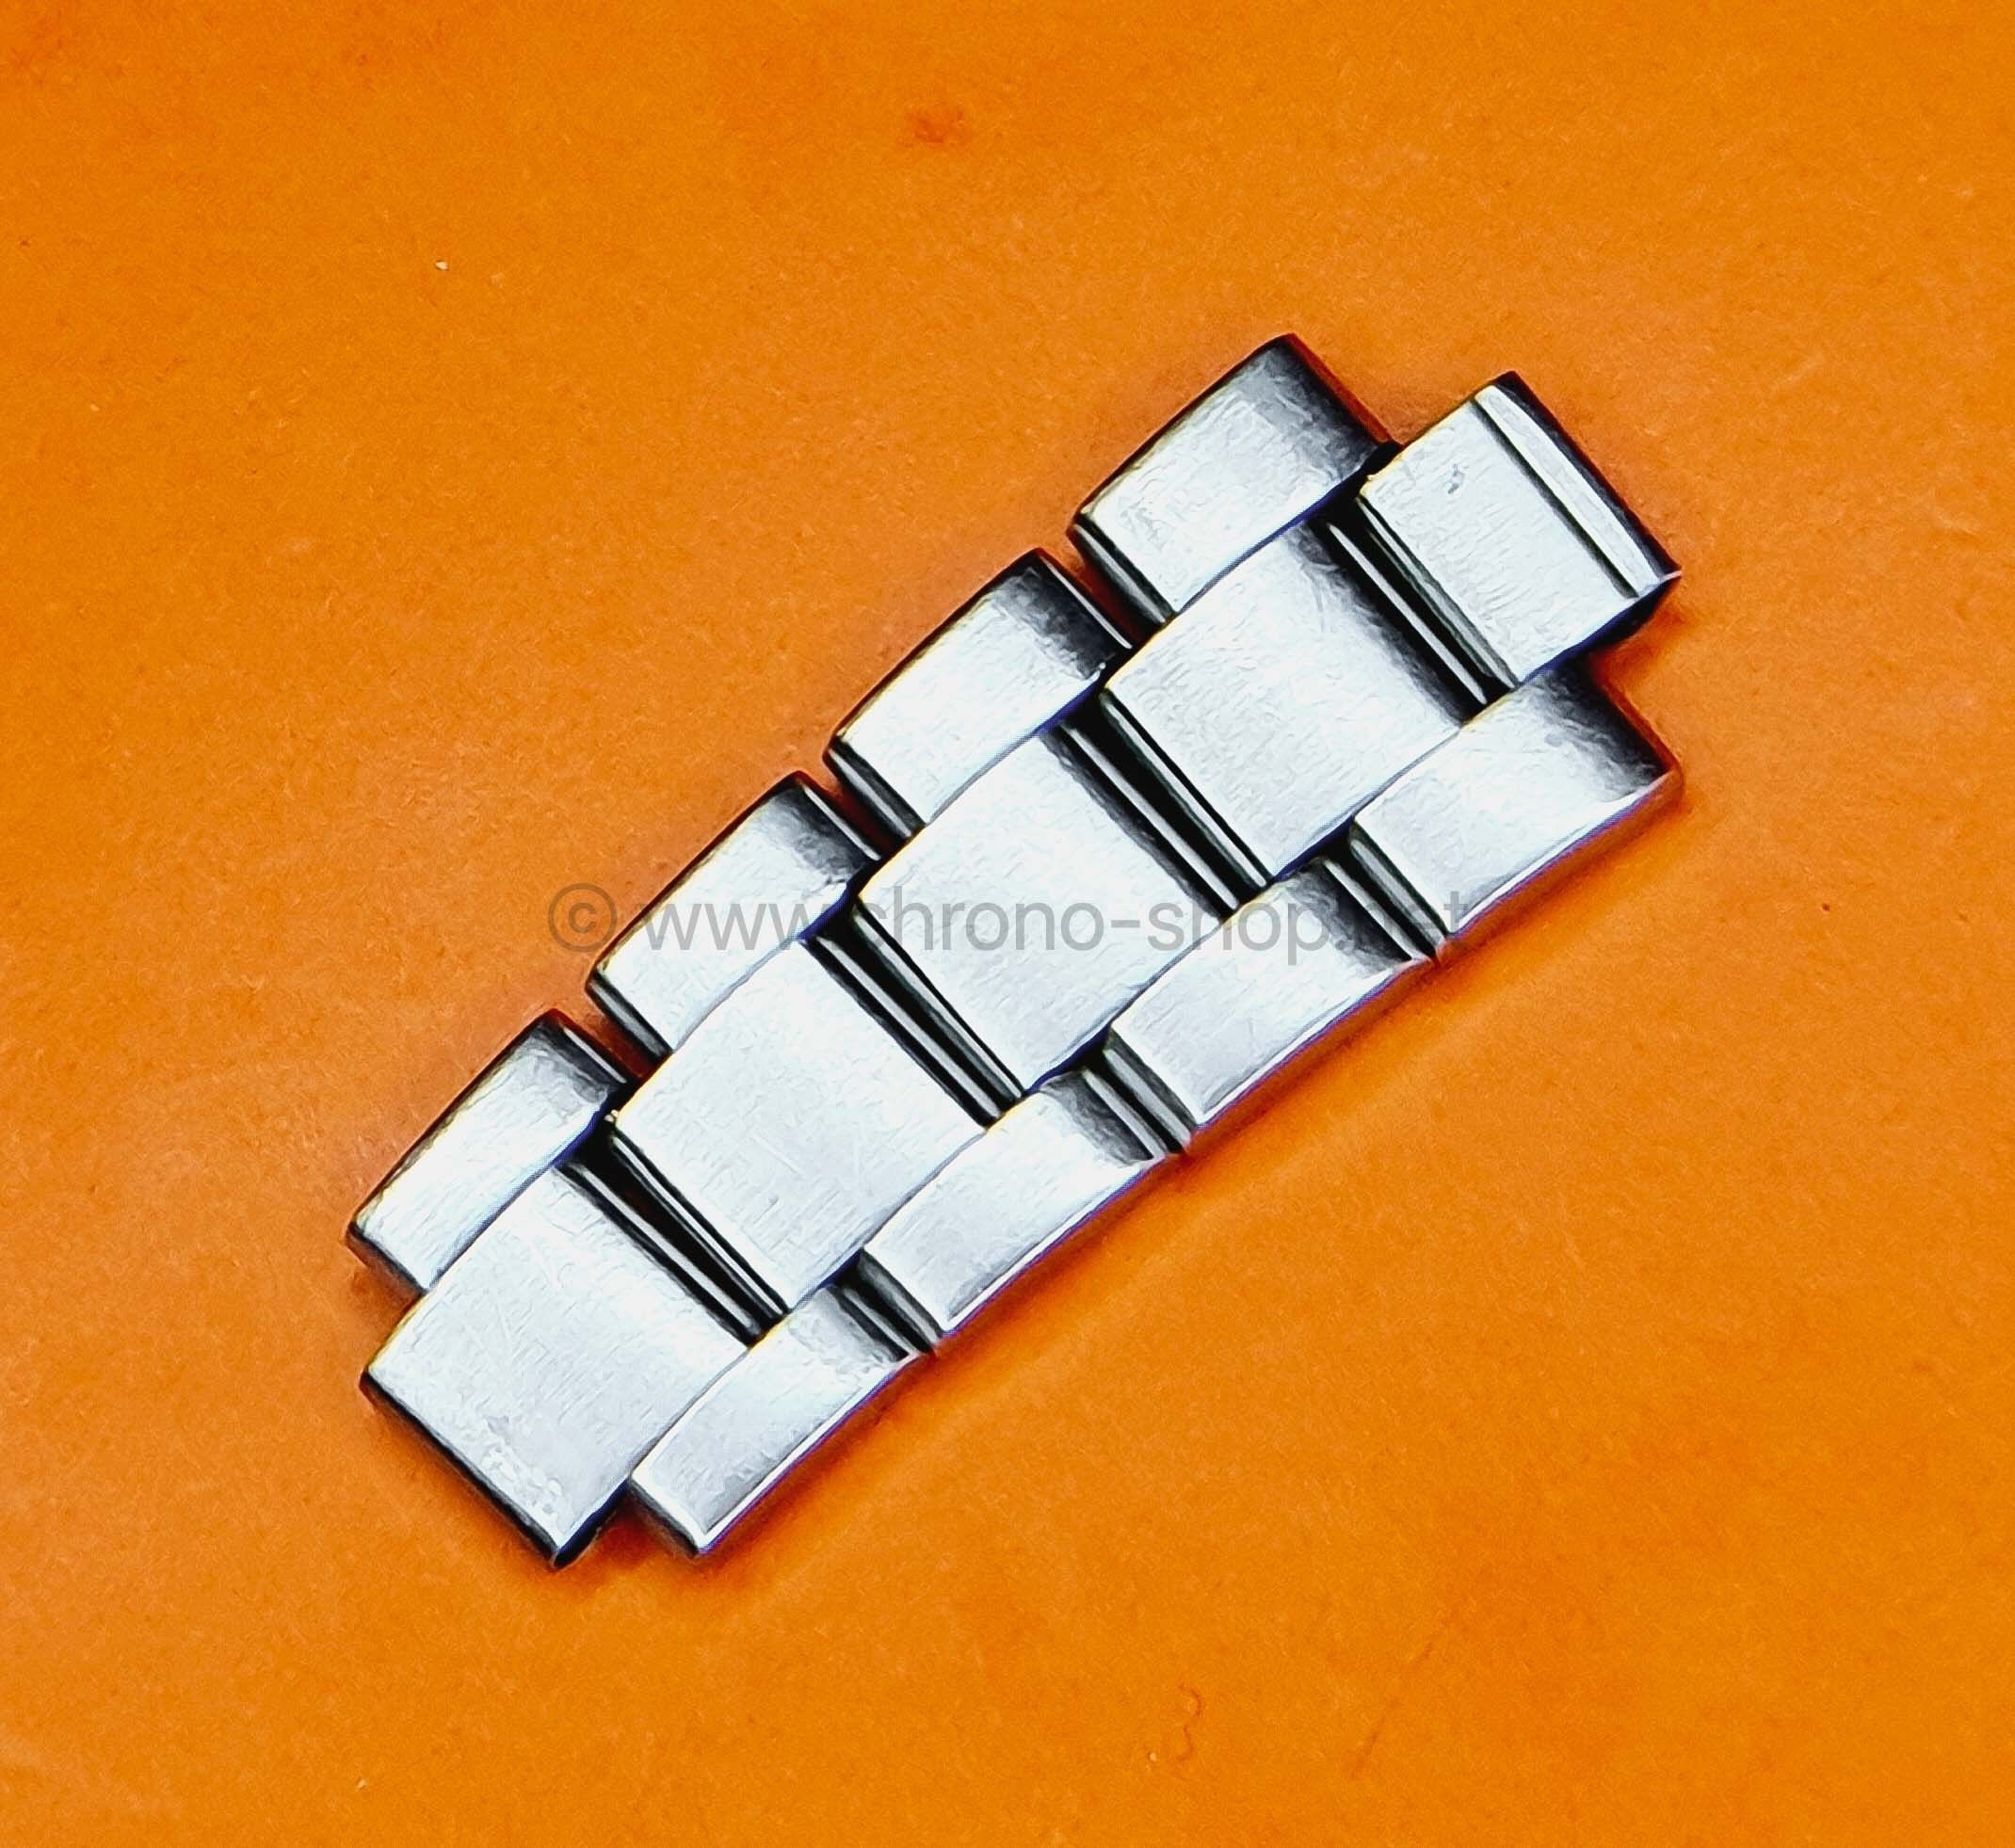 Rolex 93150 parts Oyster links bands spares Submariner watches 5512,5513,1680,168000,16800,14060,16760,16610